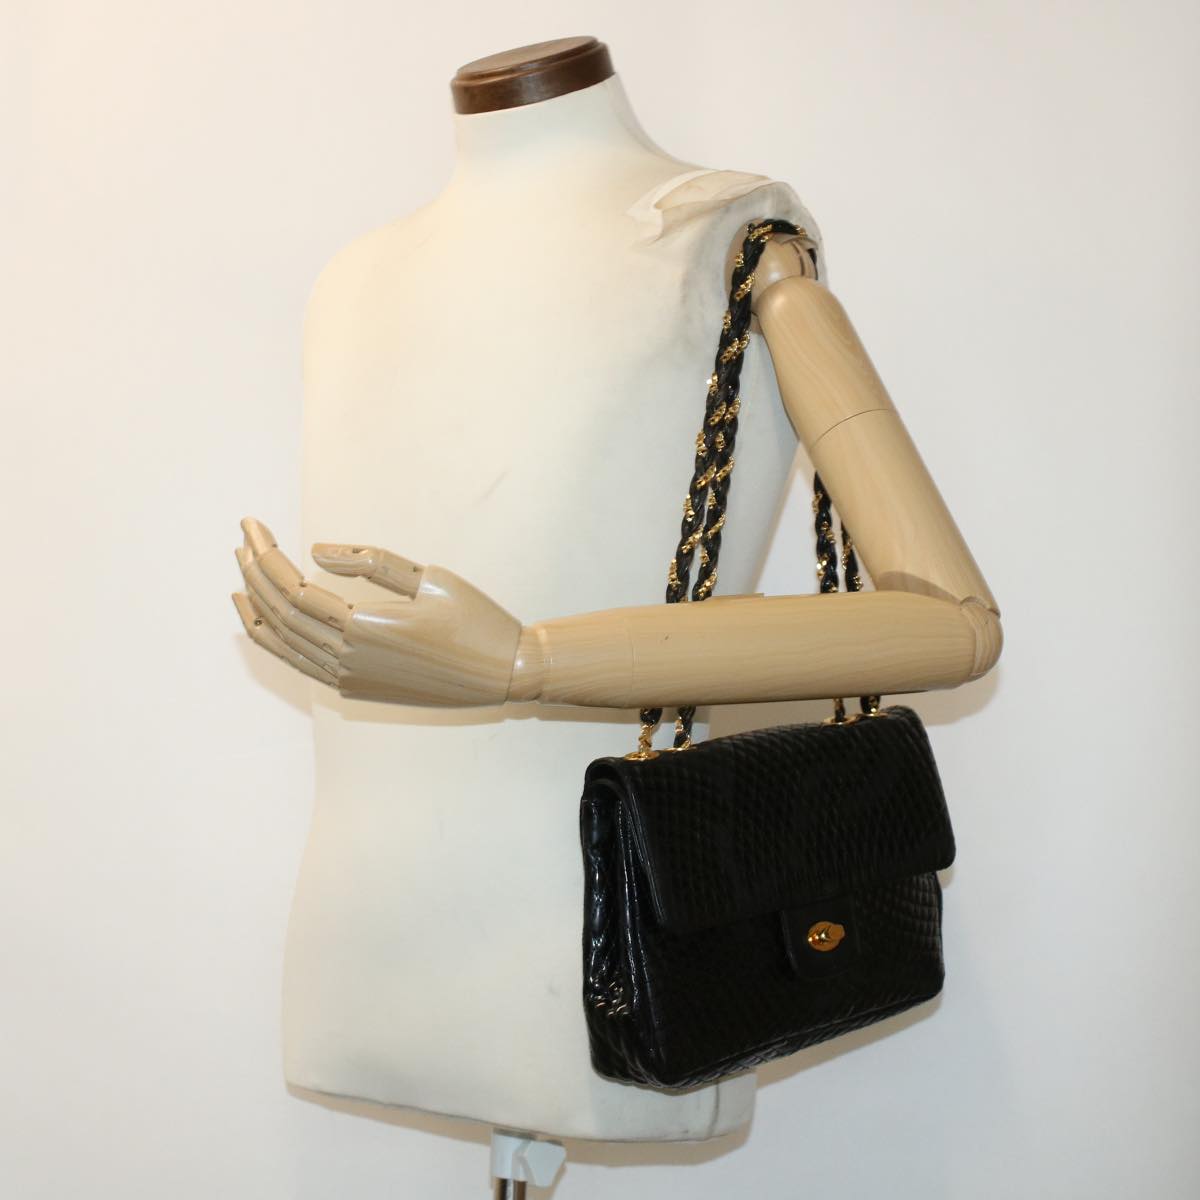 BALLY Chain Shoulder Bag Patent leather Black Auth yb189